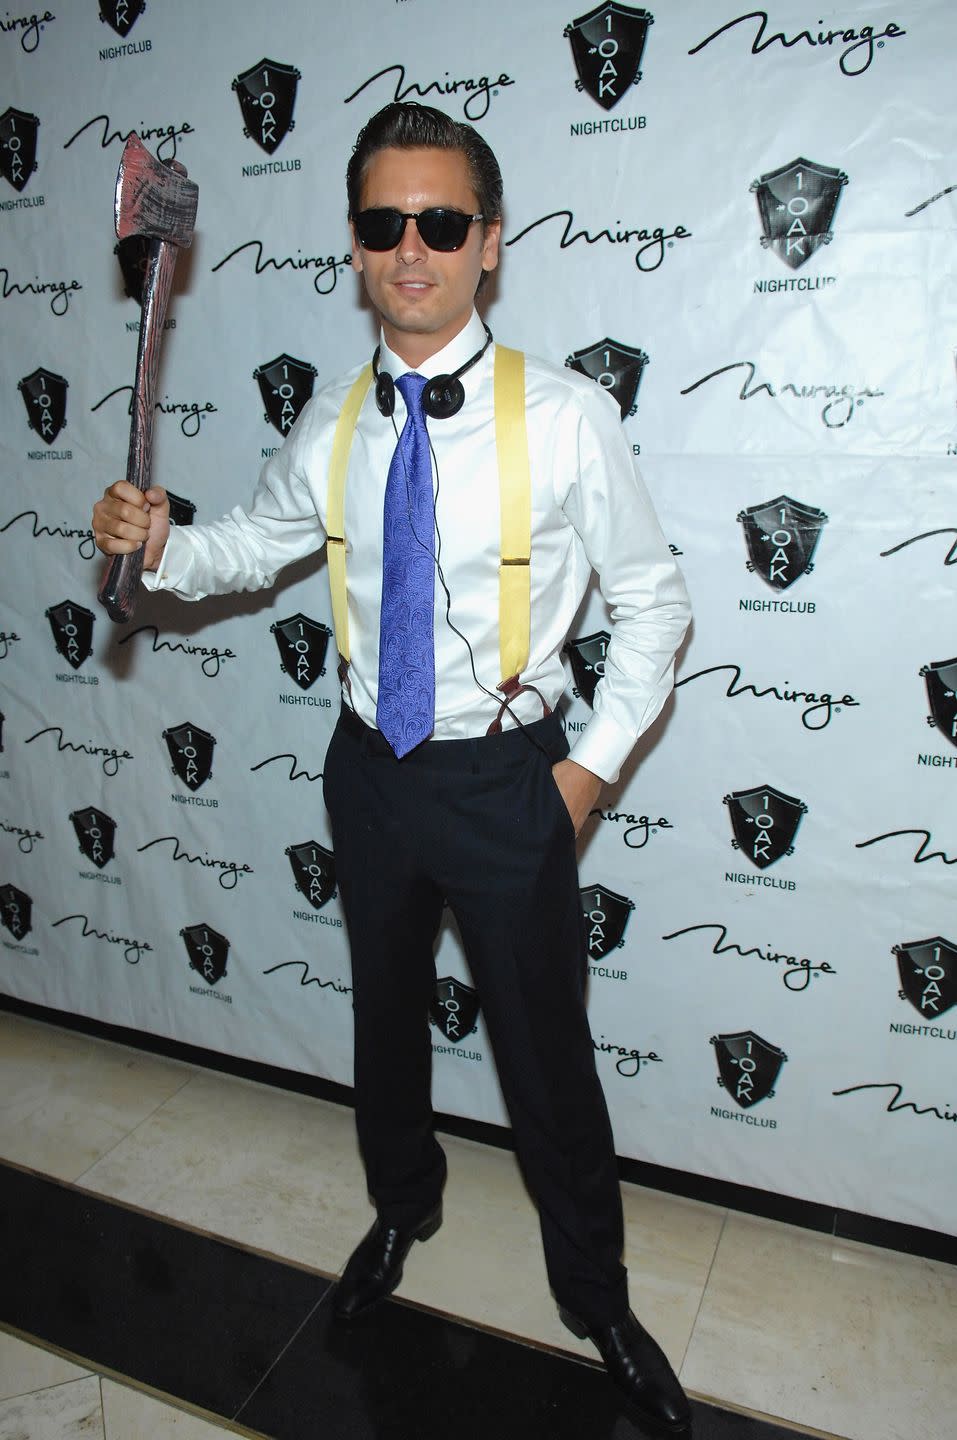 Patrick from 'American Psycho'